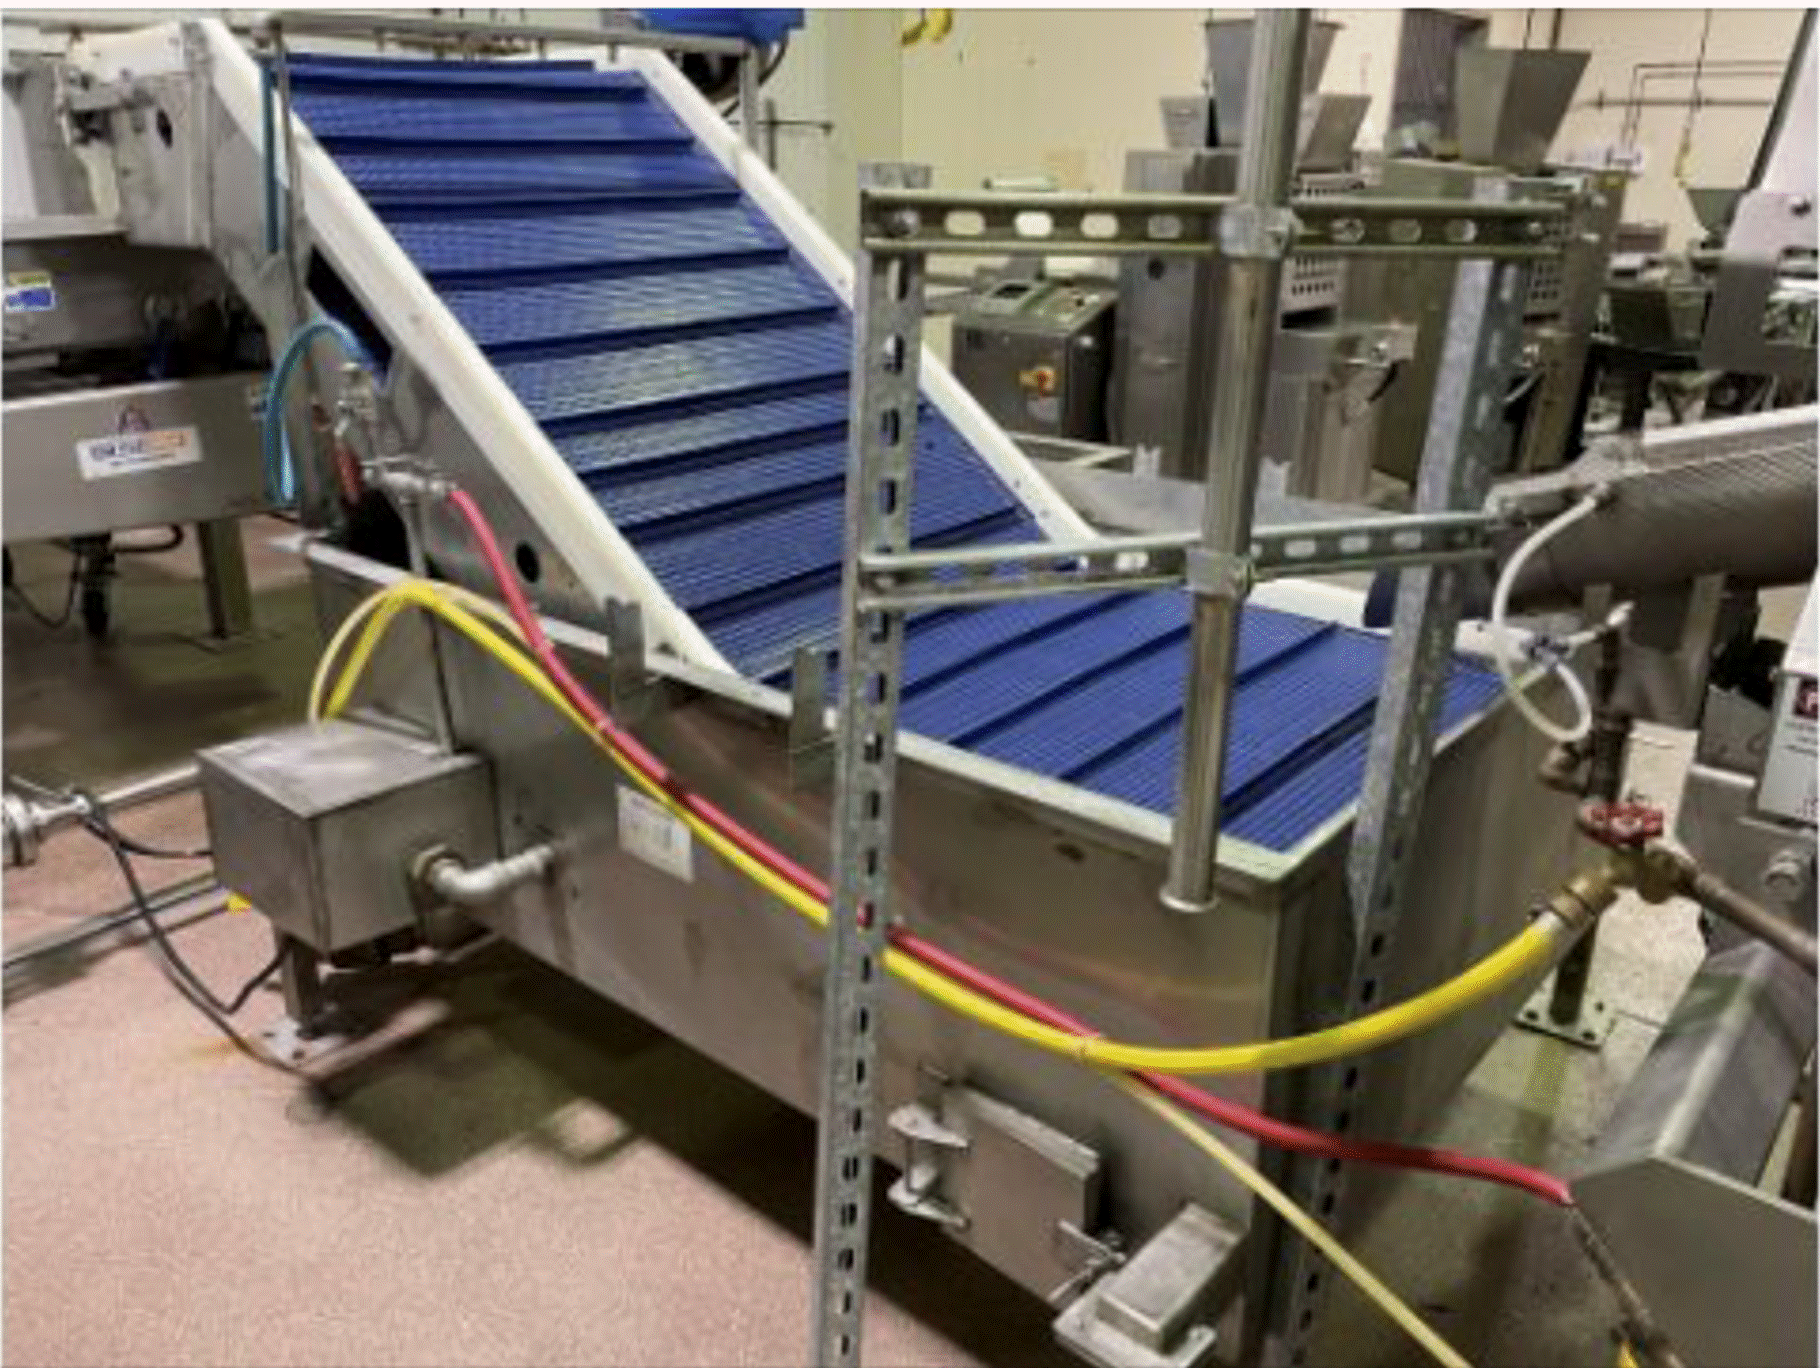 Key Technology Iso-Flo Vibratory Conveyor, Aprox. 36" x 72", Max. 7 Stroke Shaker Table with - Image 2 of 4